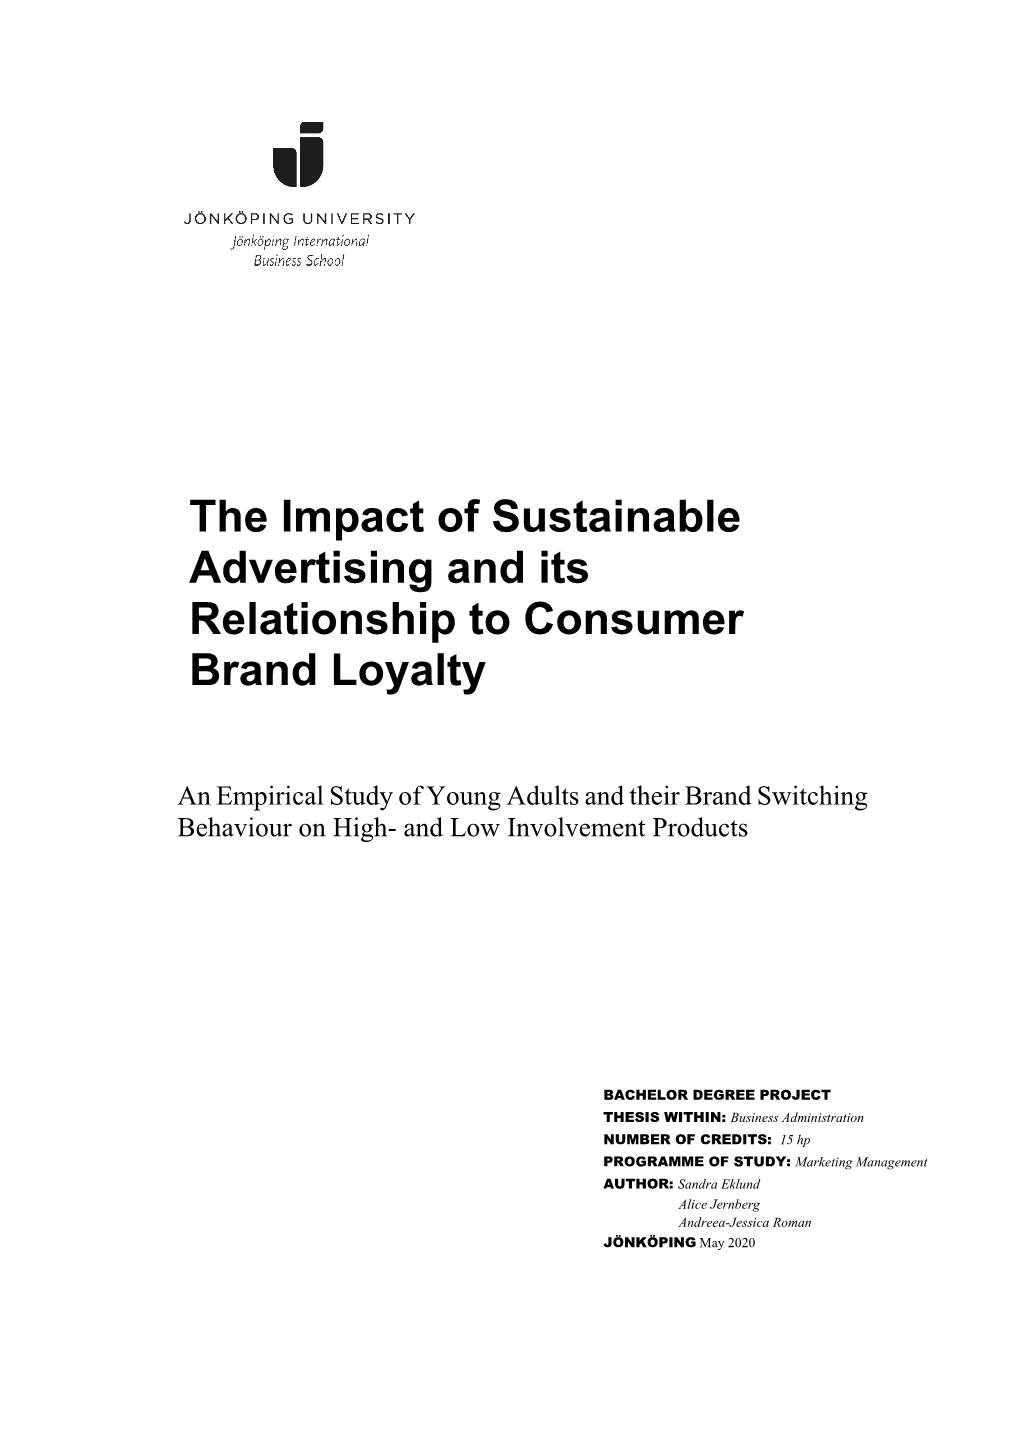 The Impact of Sustainable Advertising and Its Relationship to Consumer